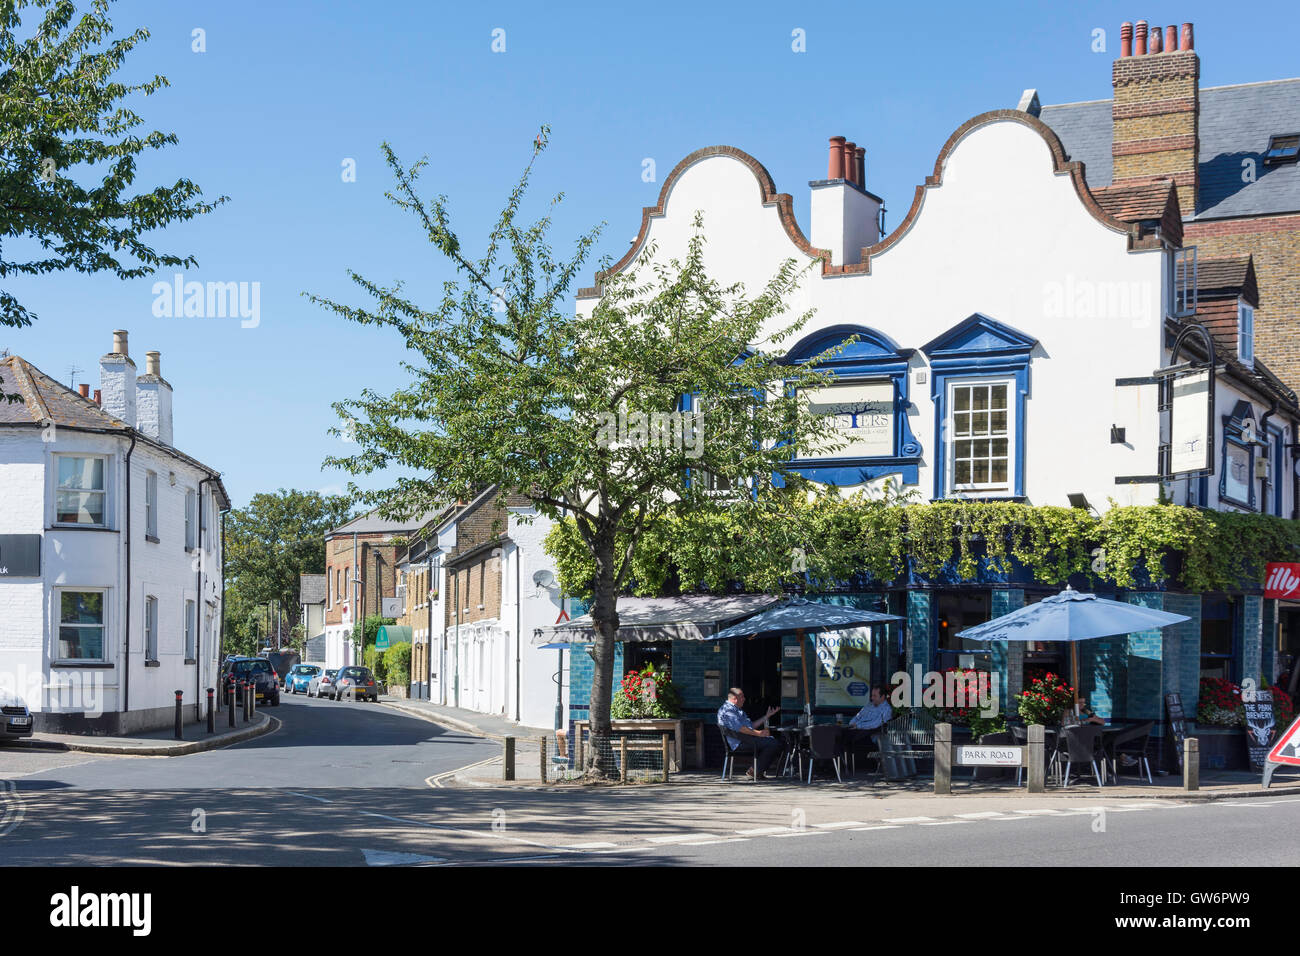 Foresters Pub on High Street, Hampton Wick, Royal Borough of Richmond upon Thames, Greater London, England, United Kingdom Stock Photo